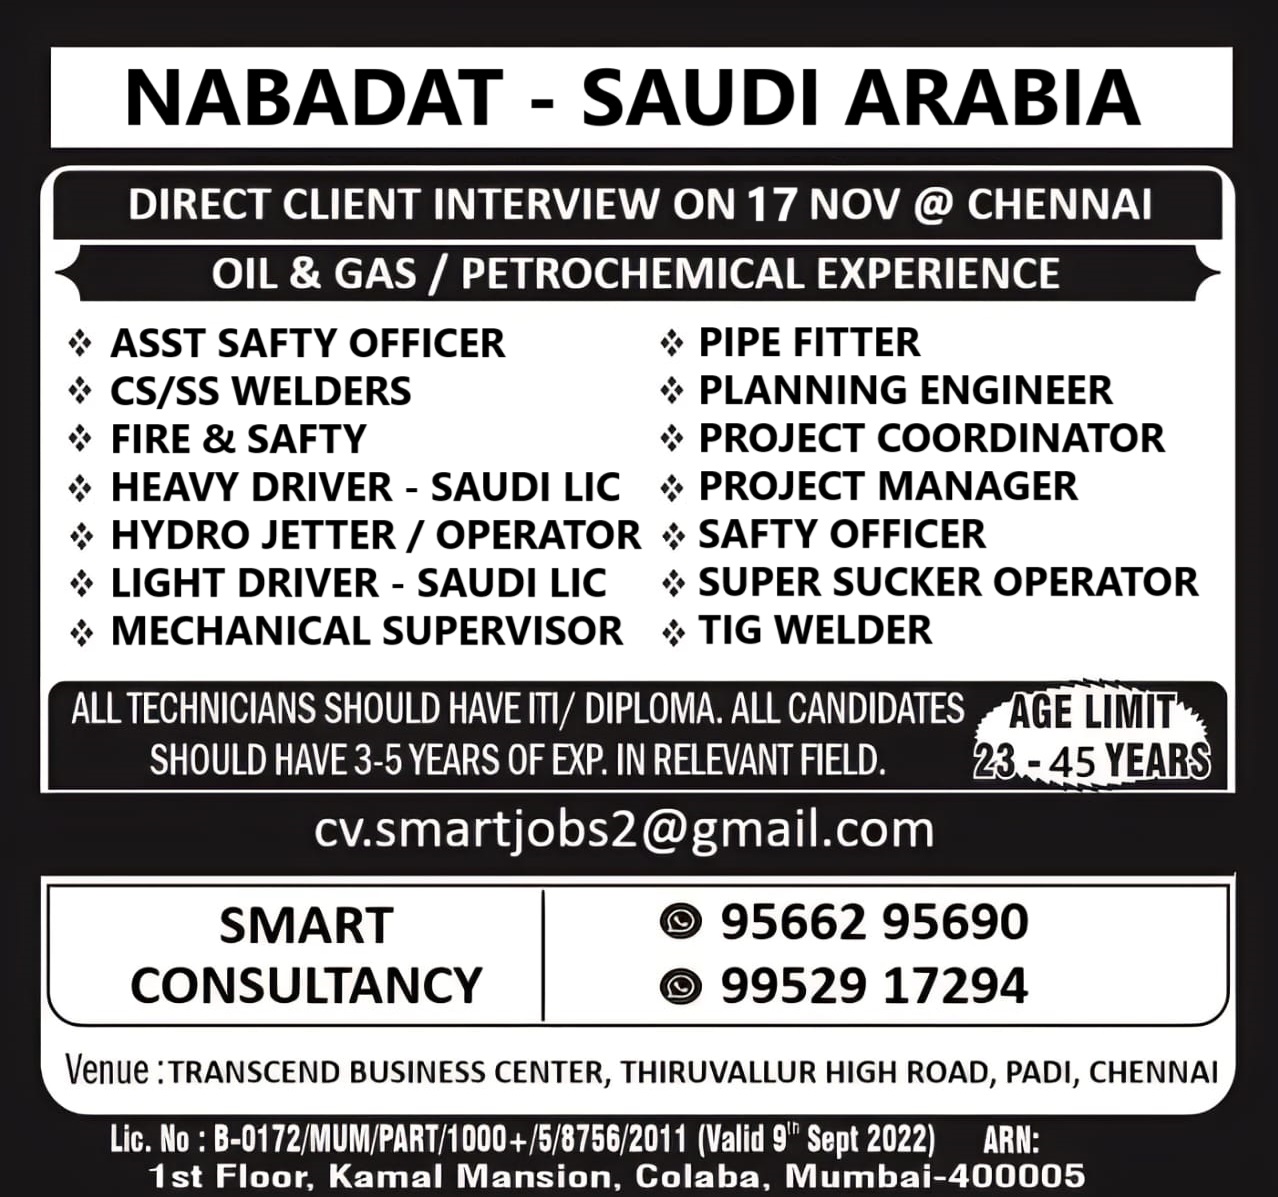 WANTED FOR NABADAT - SAUDI  DIRECT CLIENT INTERVIEW ON 17 NOV - CHENNAI